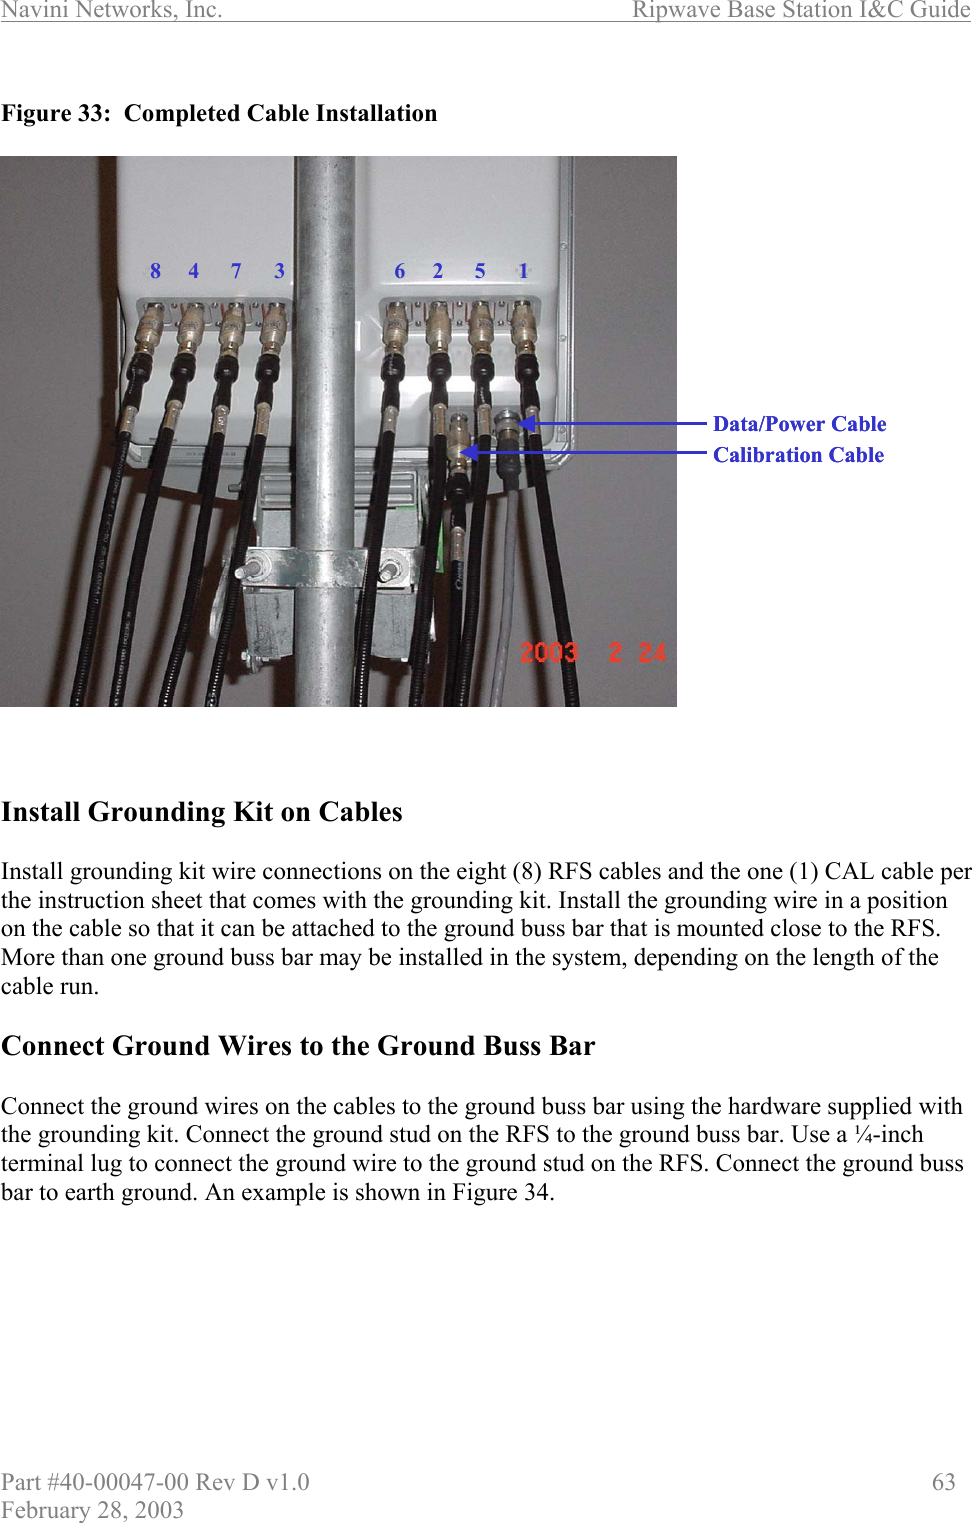 Navini Networks, Inc.                          Ripwave Base Station I&amp;C Guide Part #40-00047-00 Rev D v1.0                     63 February 28, 2003  Figure 33:  Completed Cable Installation     Install Grounding Kit on Cables  Install grounding kit wire connections on the eight (8) RFS cables and the one (1) CAL cable per the instruction sheet that comes with the grounding kit. Install the grounding wire in a position on the cable so that it can be attached to the ground buss bar that is mounted close to the RFS. More than one ground buss bar may be installed in the system, depending on the length of the cable run.  Connect Ground Wires to the Ground Buss Bar  Connect the ground wires on the cables to the ground buss bar using the hardware supplied with the grounding kit. Connect the ground stud on the RFS to the ground buss bar. Use a ¼-inch terminal lug to connect the ground wire to the ground stud on the RFS. Connect the ground buss bar to earth ground. An example is shown in Figure 34.  62 5 184 7 3Calibration CableData/Power Cable62 5 184 7 3Calibration CableData/Power Cable